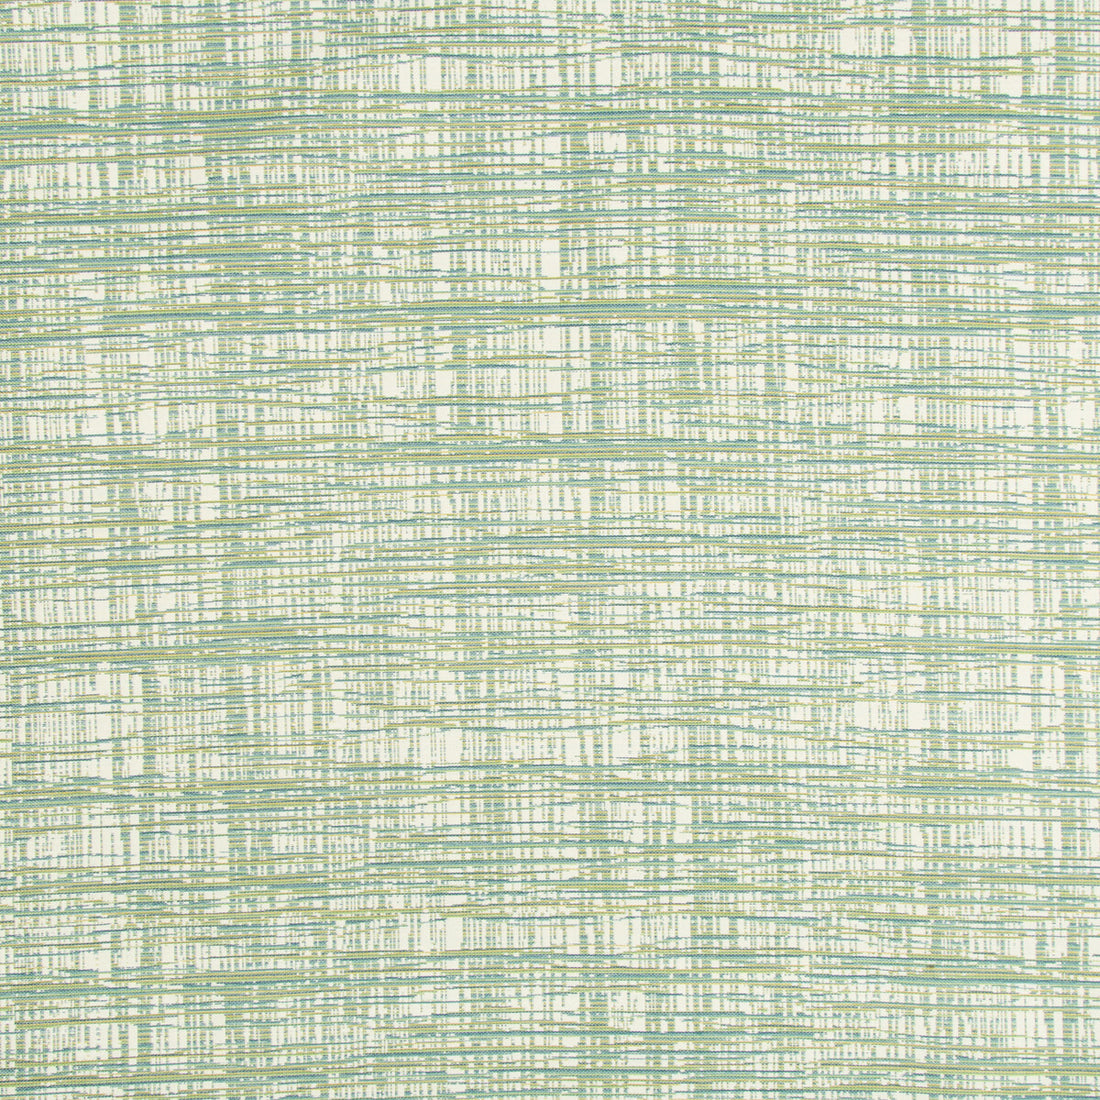 Kravet Contract fabric in 34733-3 color - pattern 34733.3.0 - by Kravet Contract in the Crypton Home collection